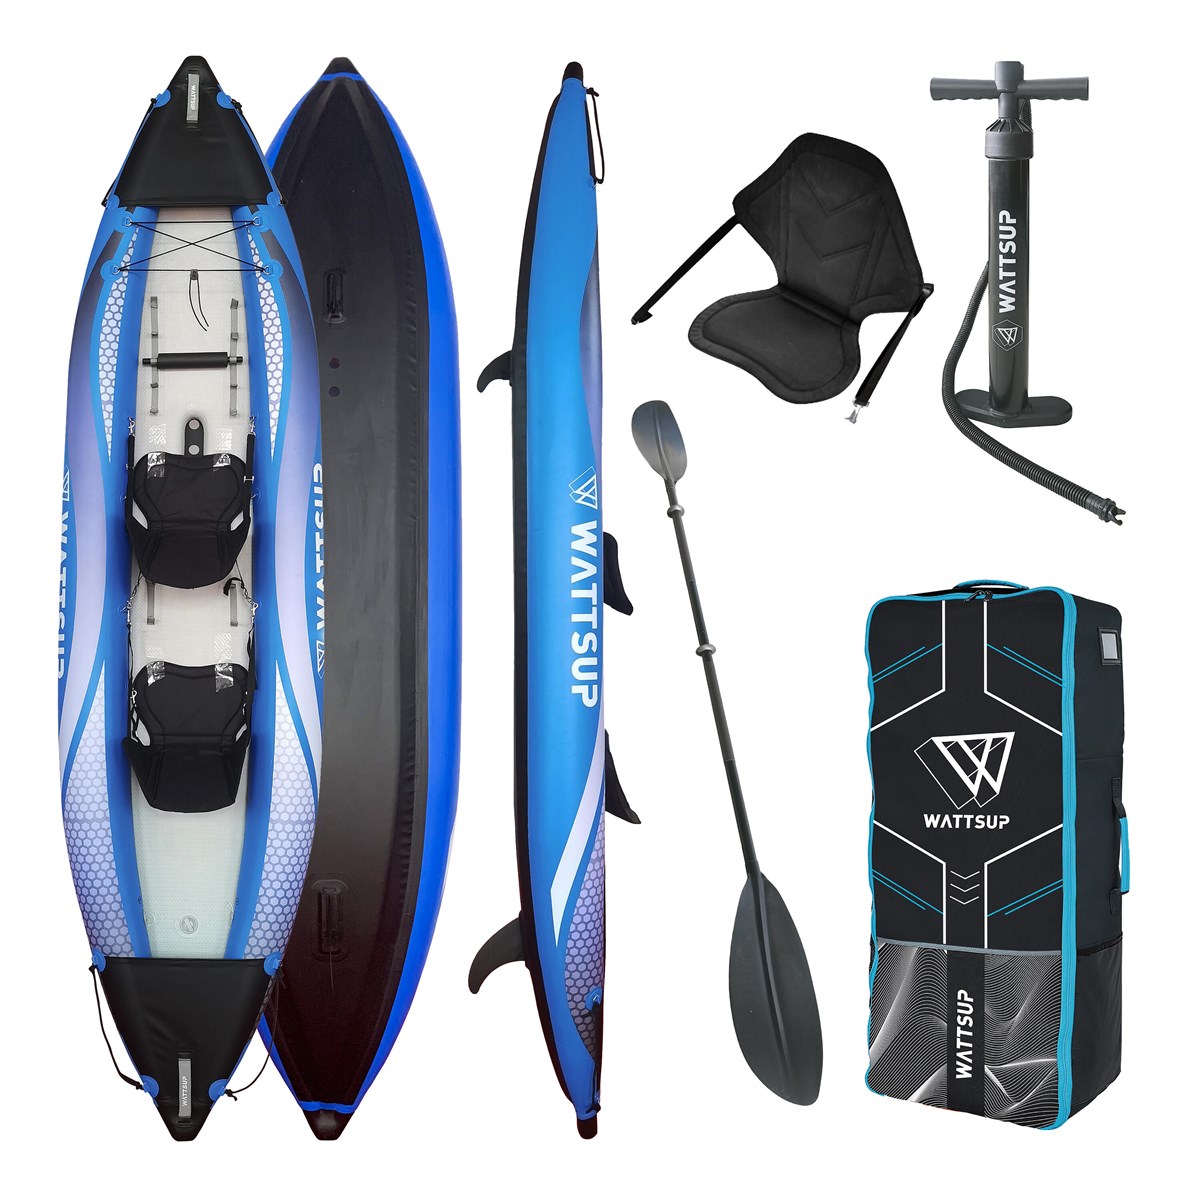 WattSUP COD - Kayak gonflable 2 places - Decathlon